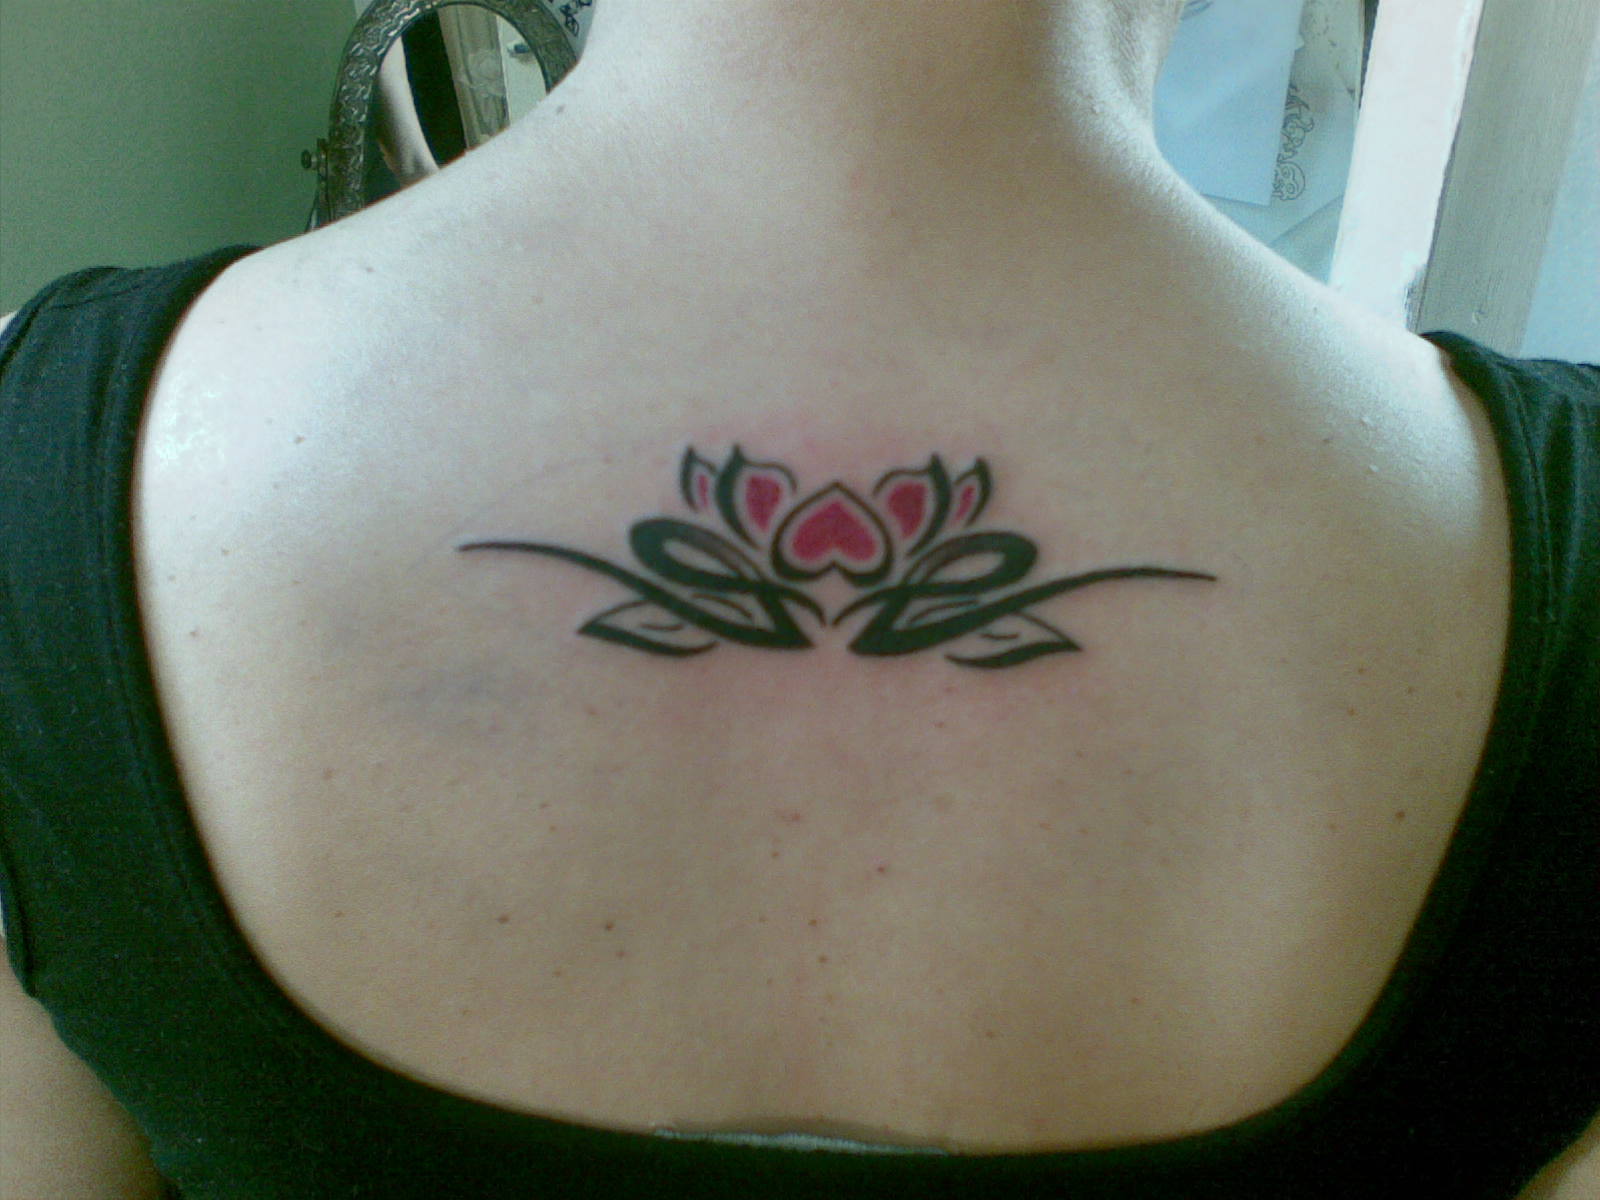 http://www.yusrablog.com/wp-content/uploads/2010/12/Louts-Flower-Tattoo-for-Young-Girls.jpg